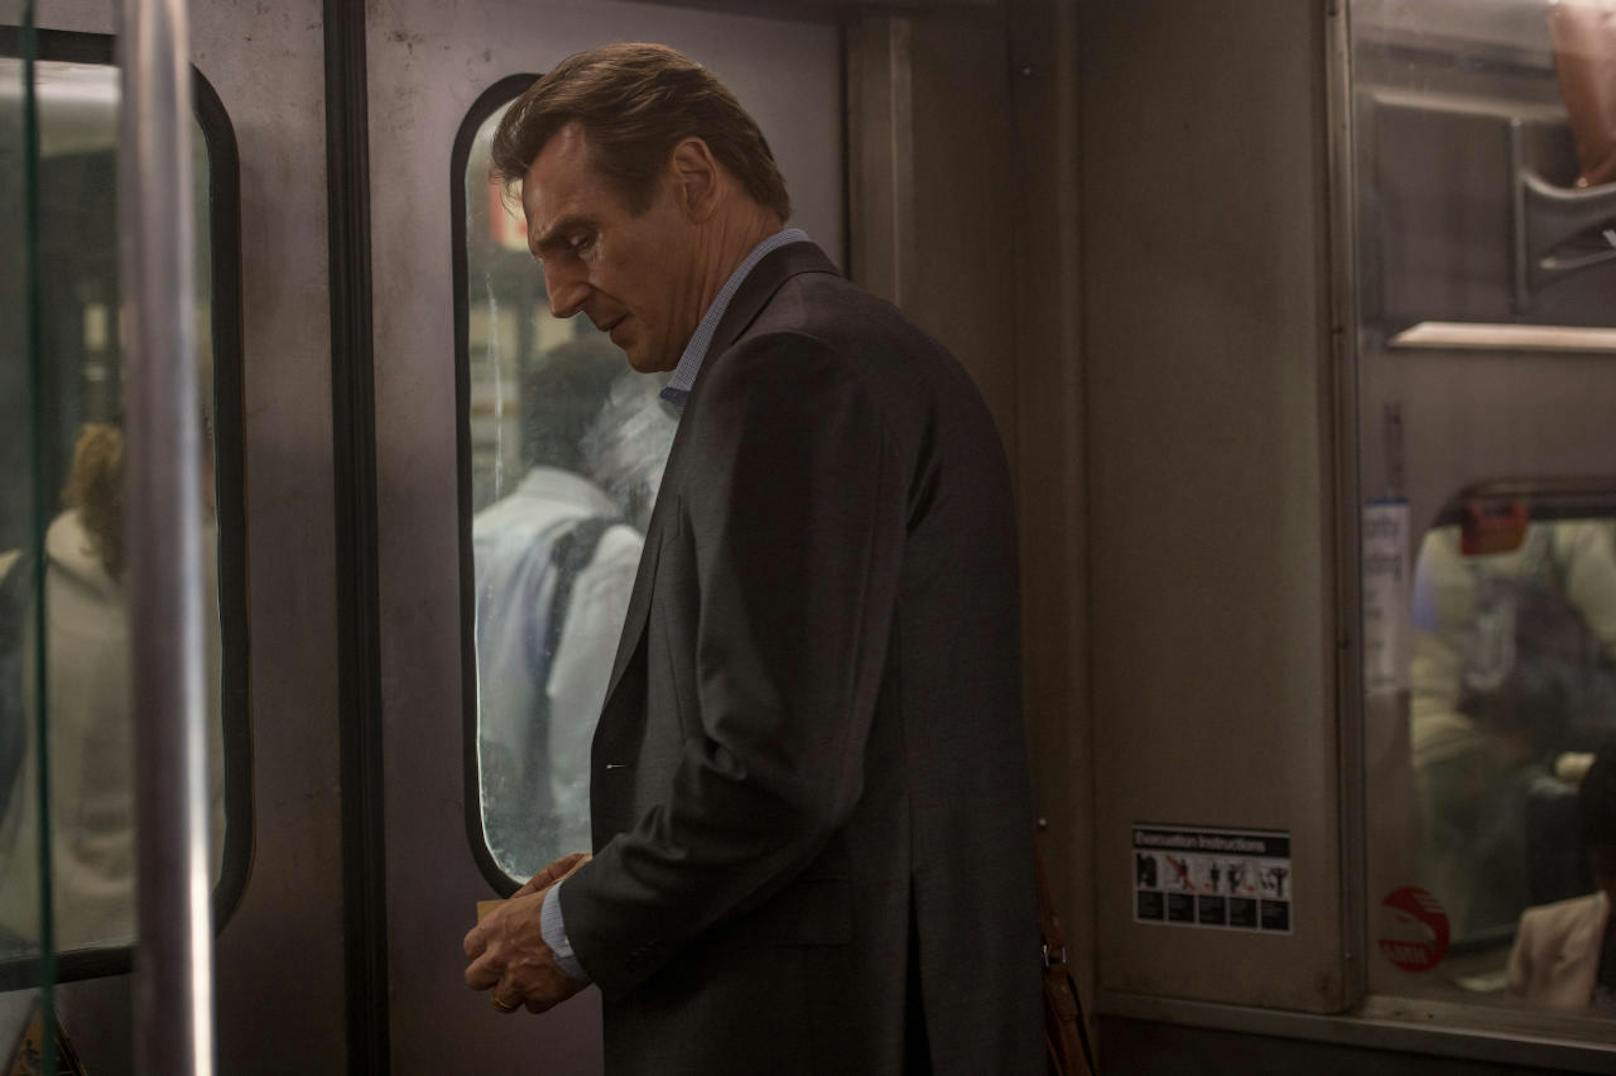 "The Commuter"